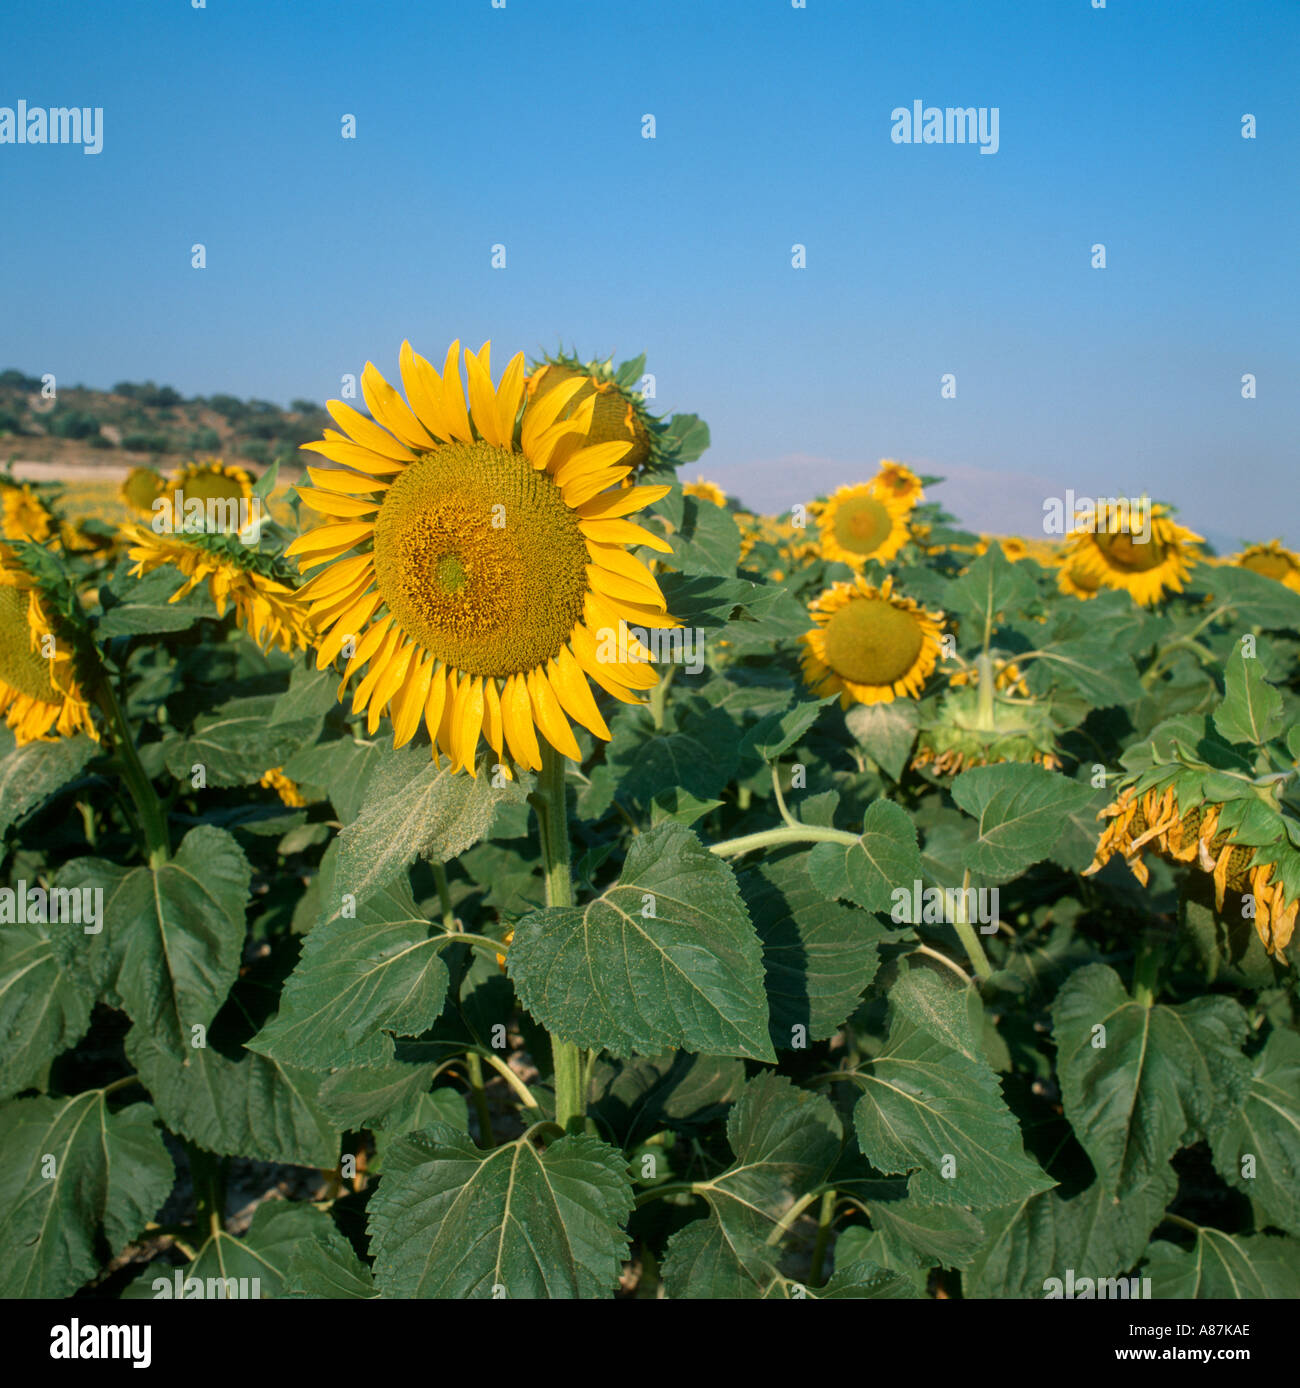 Field of sunflowers (Helianthus annuus), Andalucia, Spain Stock Photo